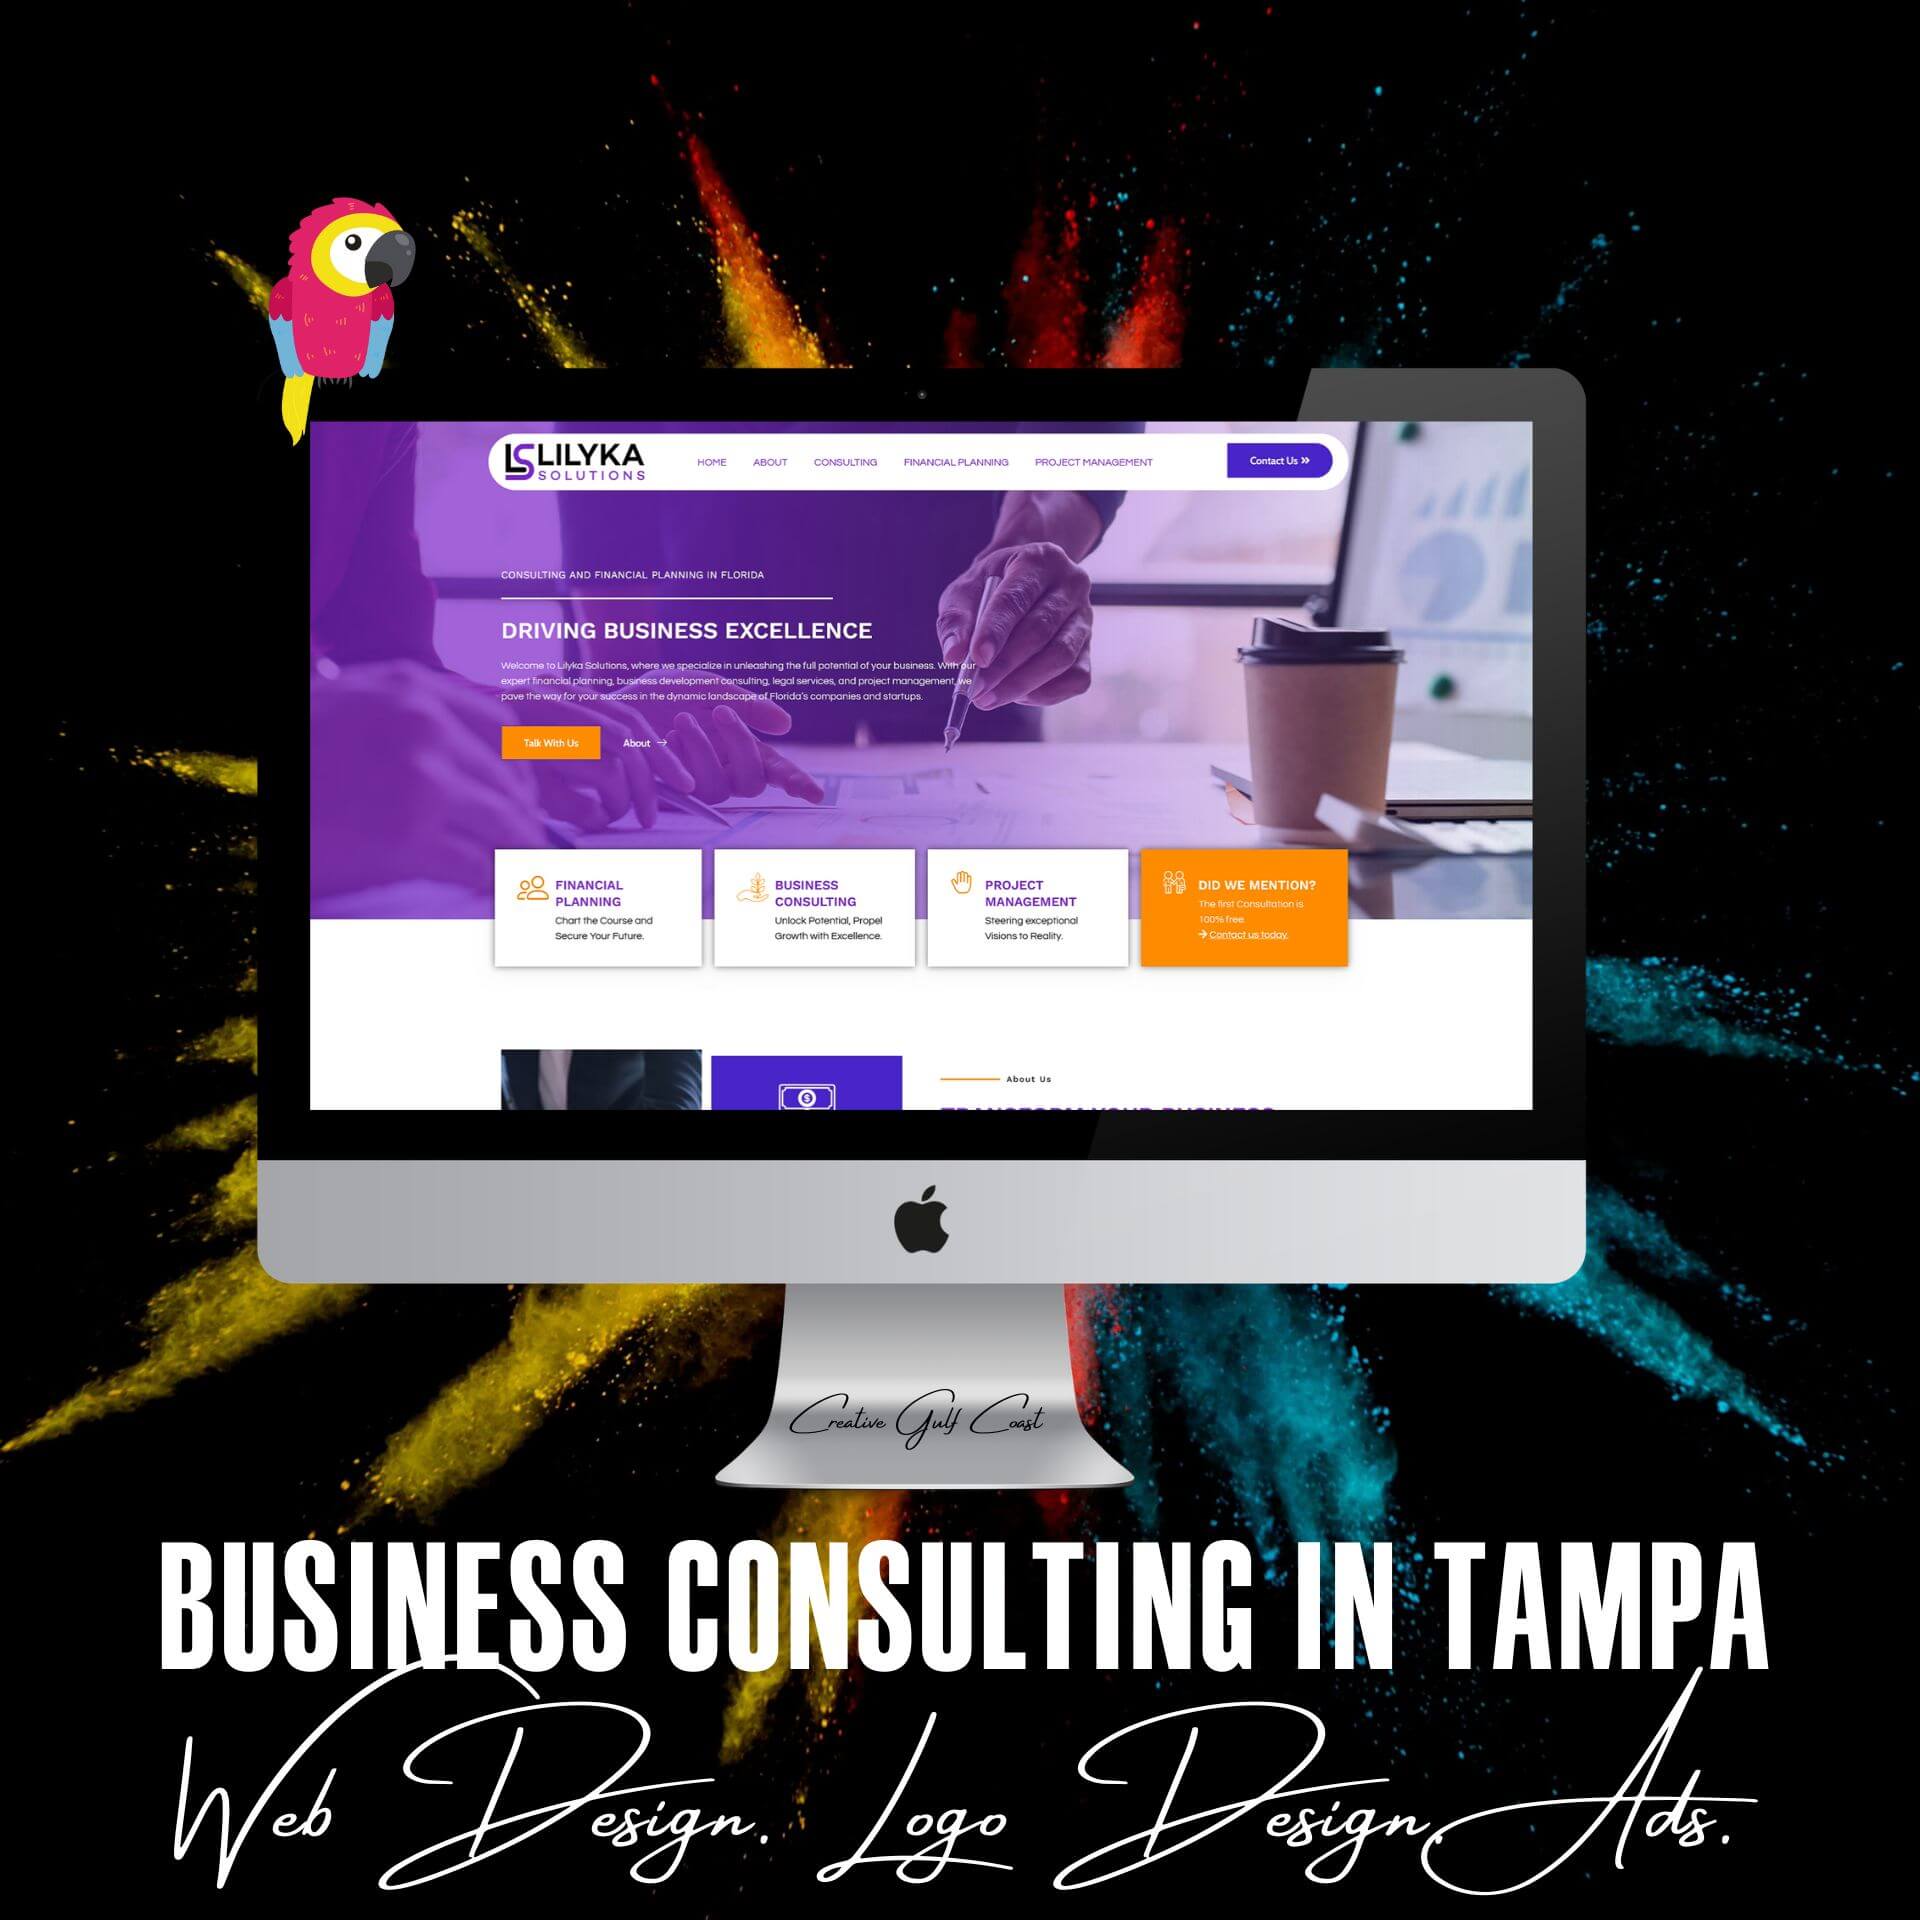 Web Design Florida - Reference Business Consultant in Tampa Bay - Creative Gulf Coast Marketing